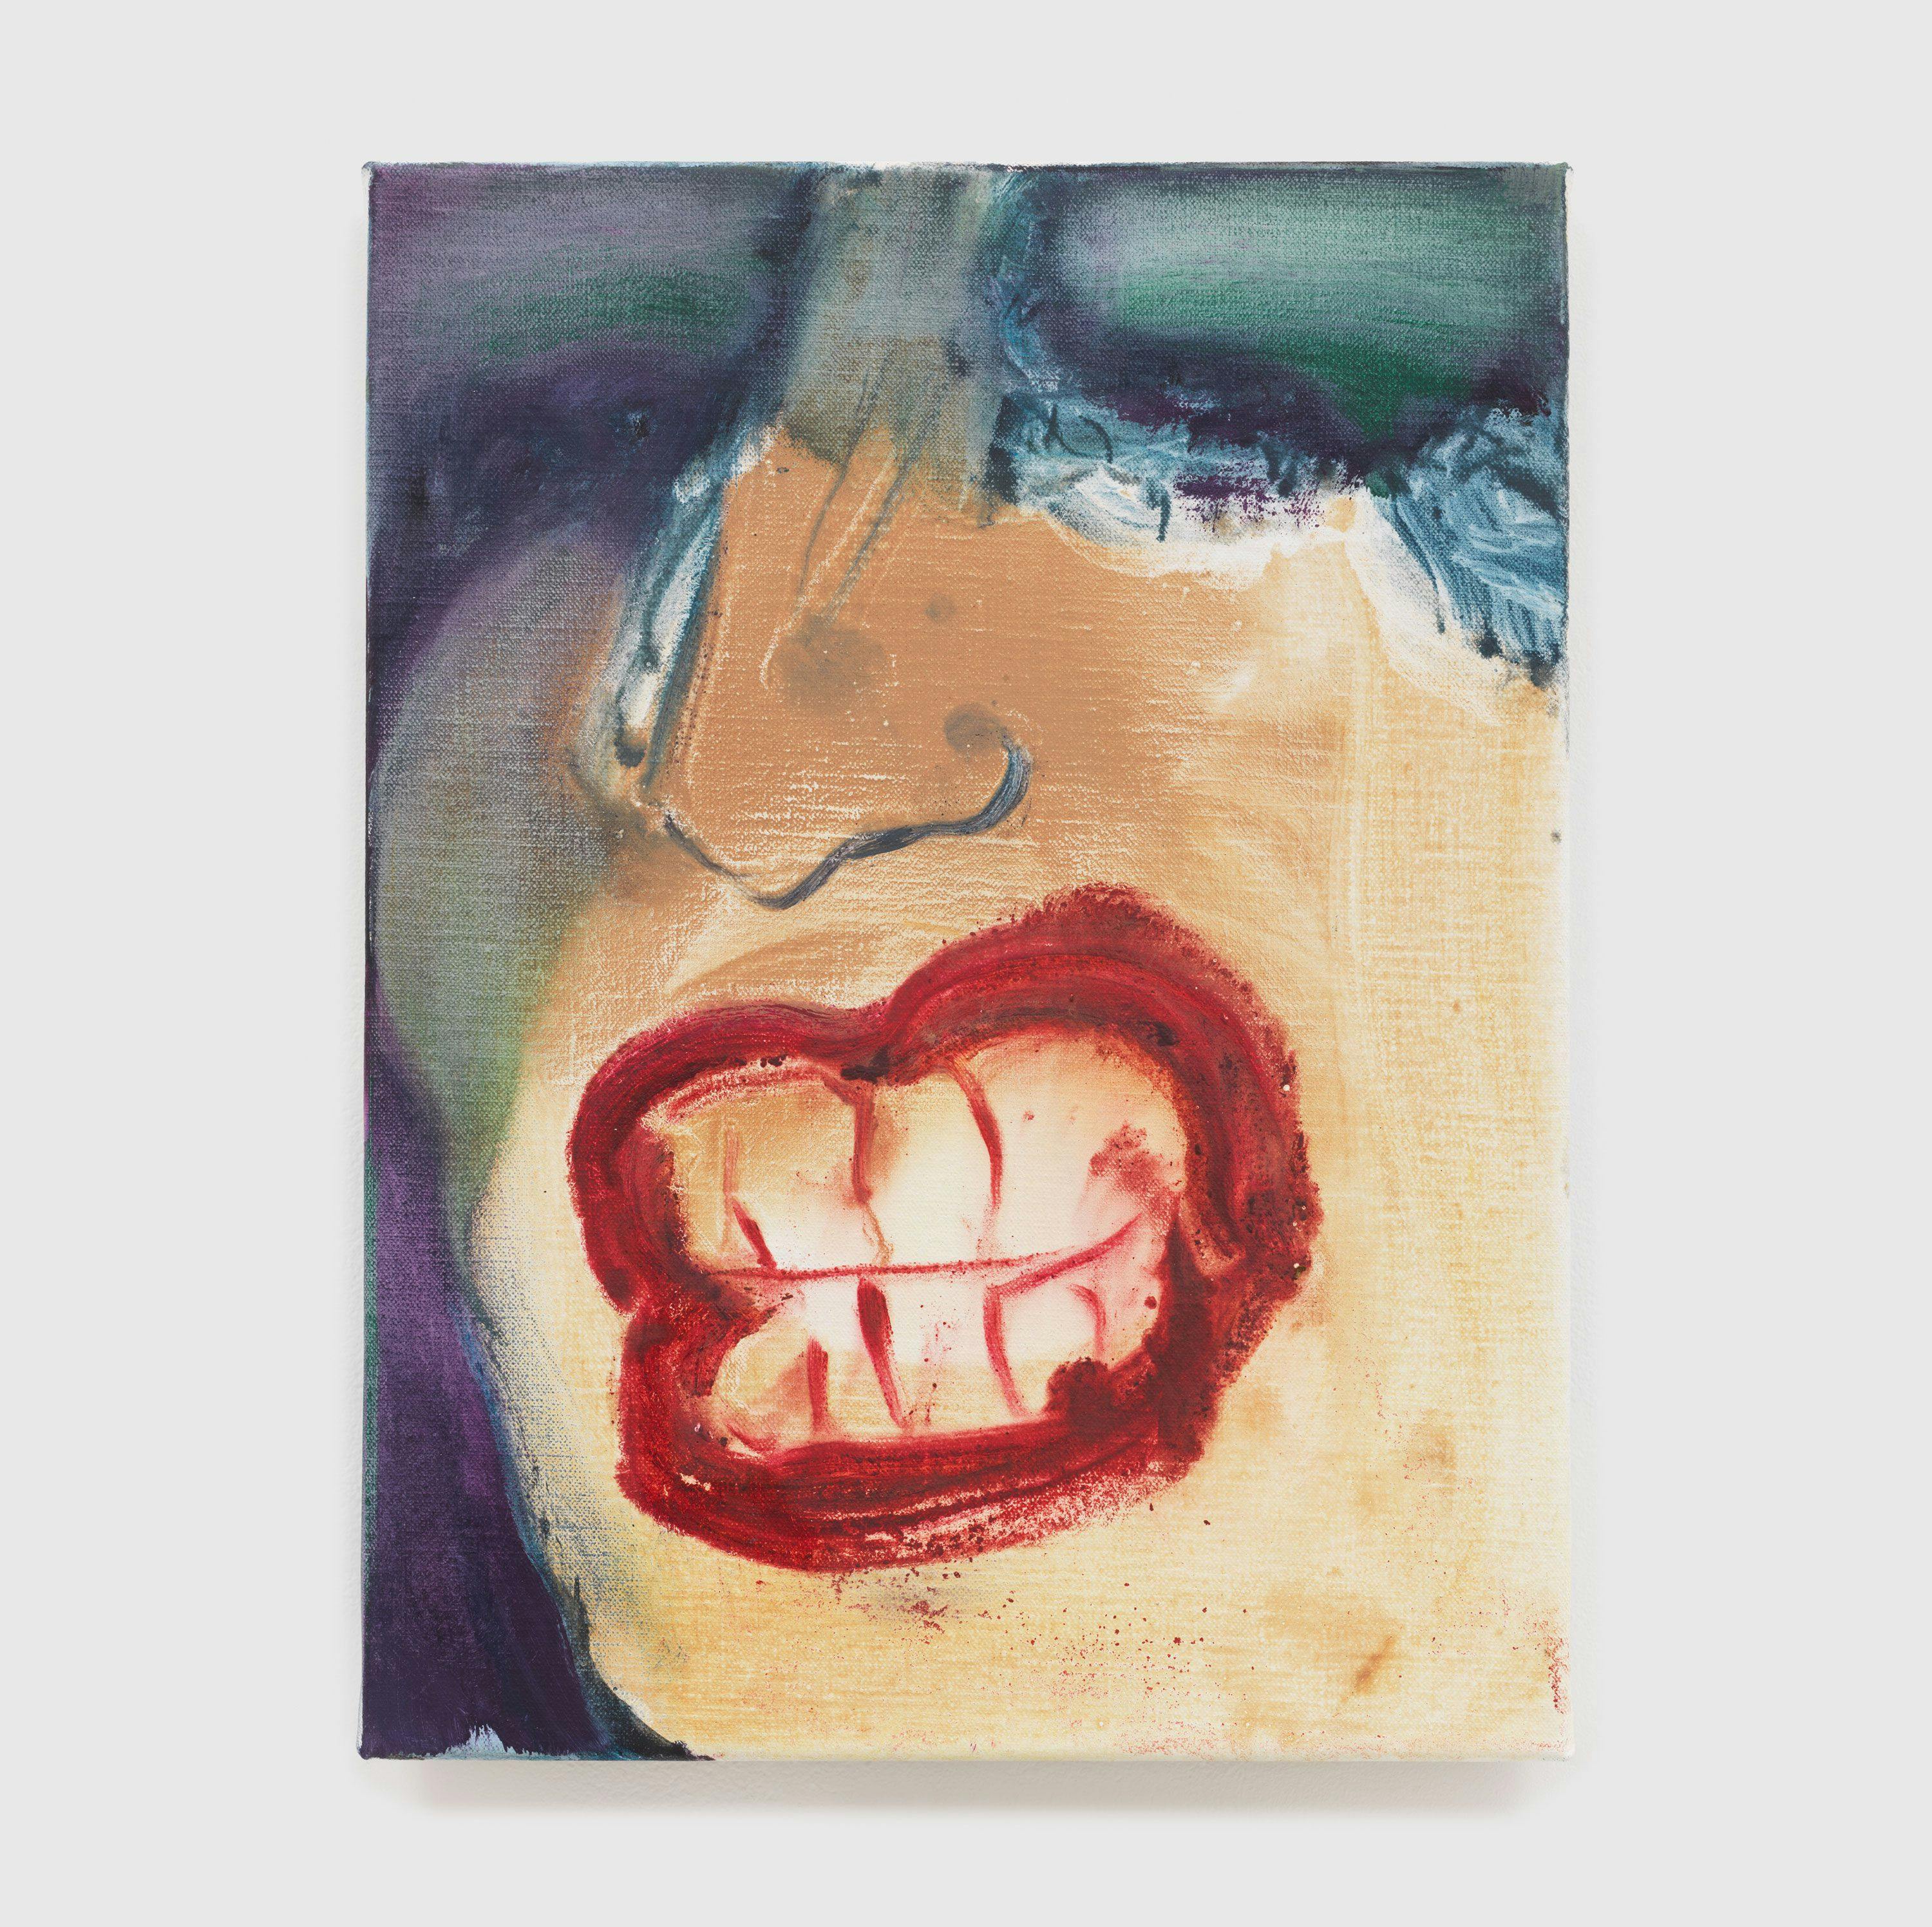 An oil on canvas painting by Marlene Dumas, titled Teeth, dated 2018.